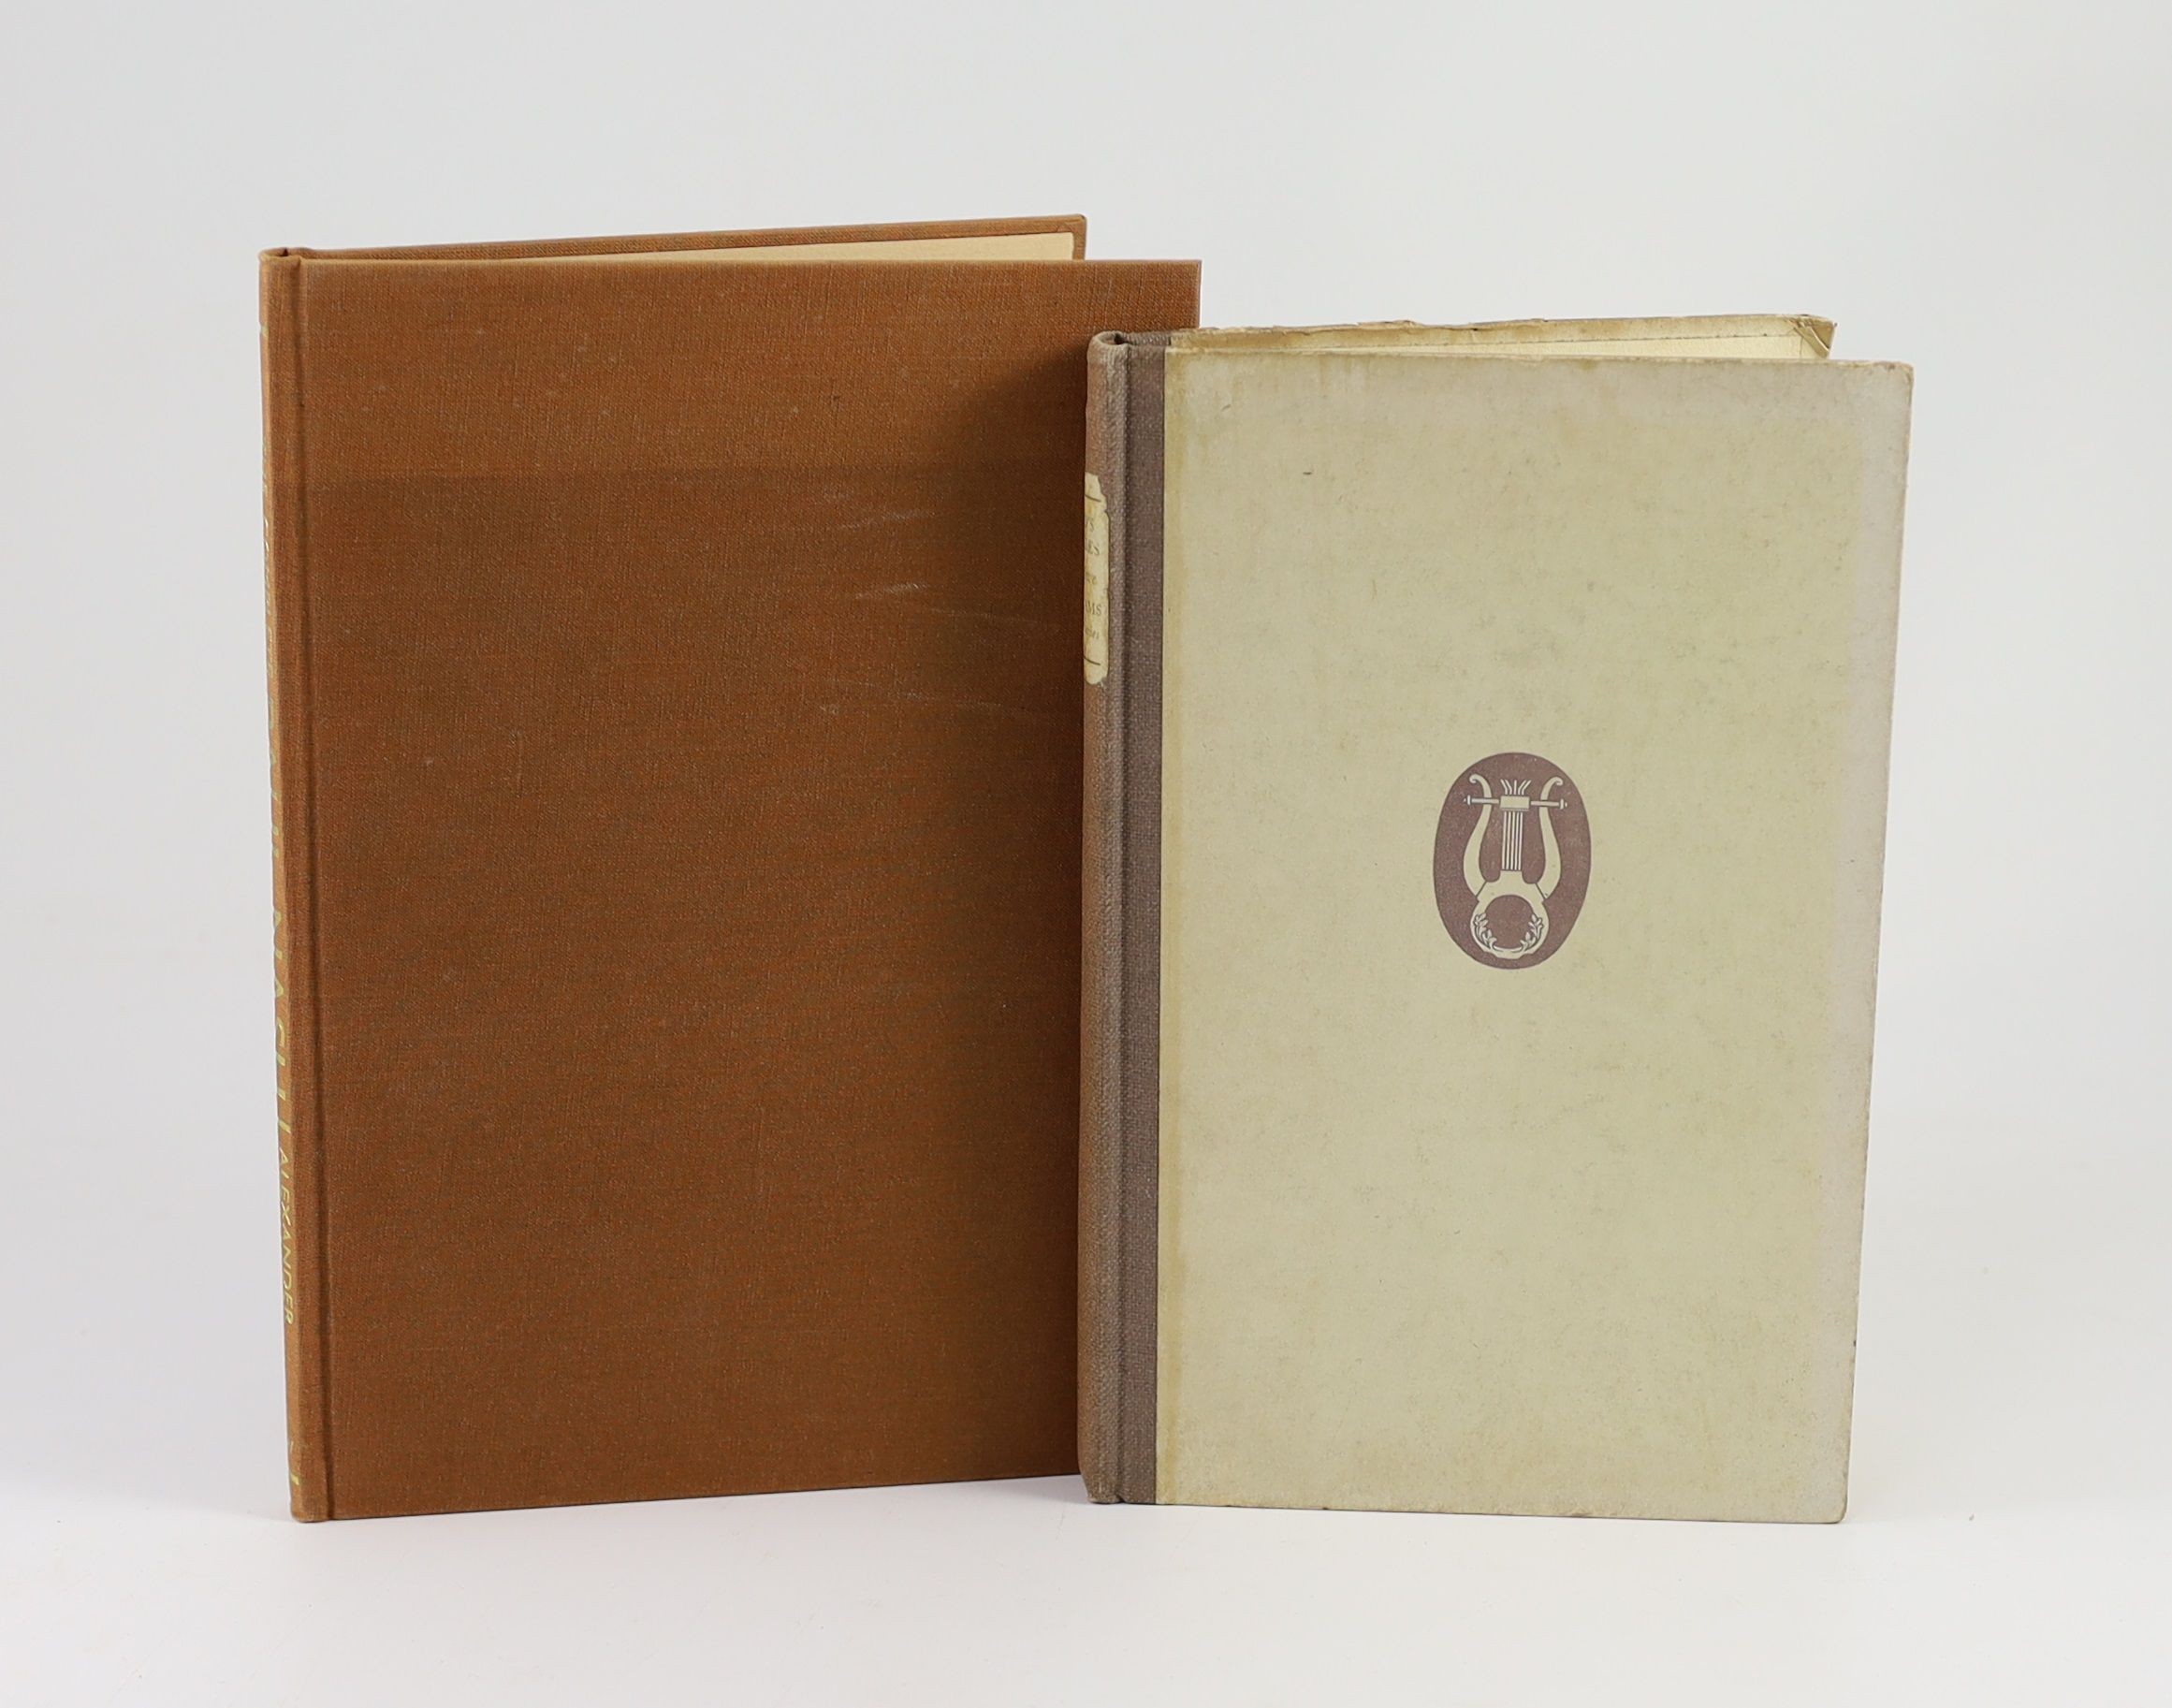 Postan, Alexander - The Complete Graphic Work of Paul Nash. 1st edition, complete with numerous illustrations within the text, publishers cloth with gilt letters direct on spine. 8vo. Secker & Warburg, London, 1973. Slig